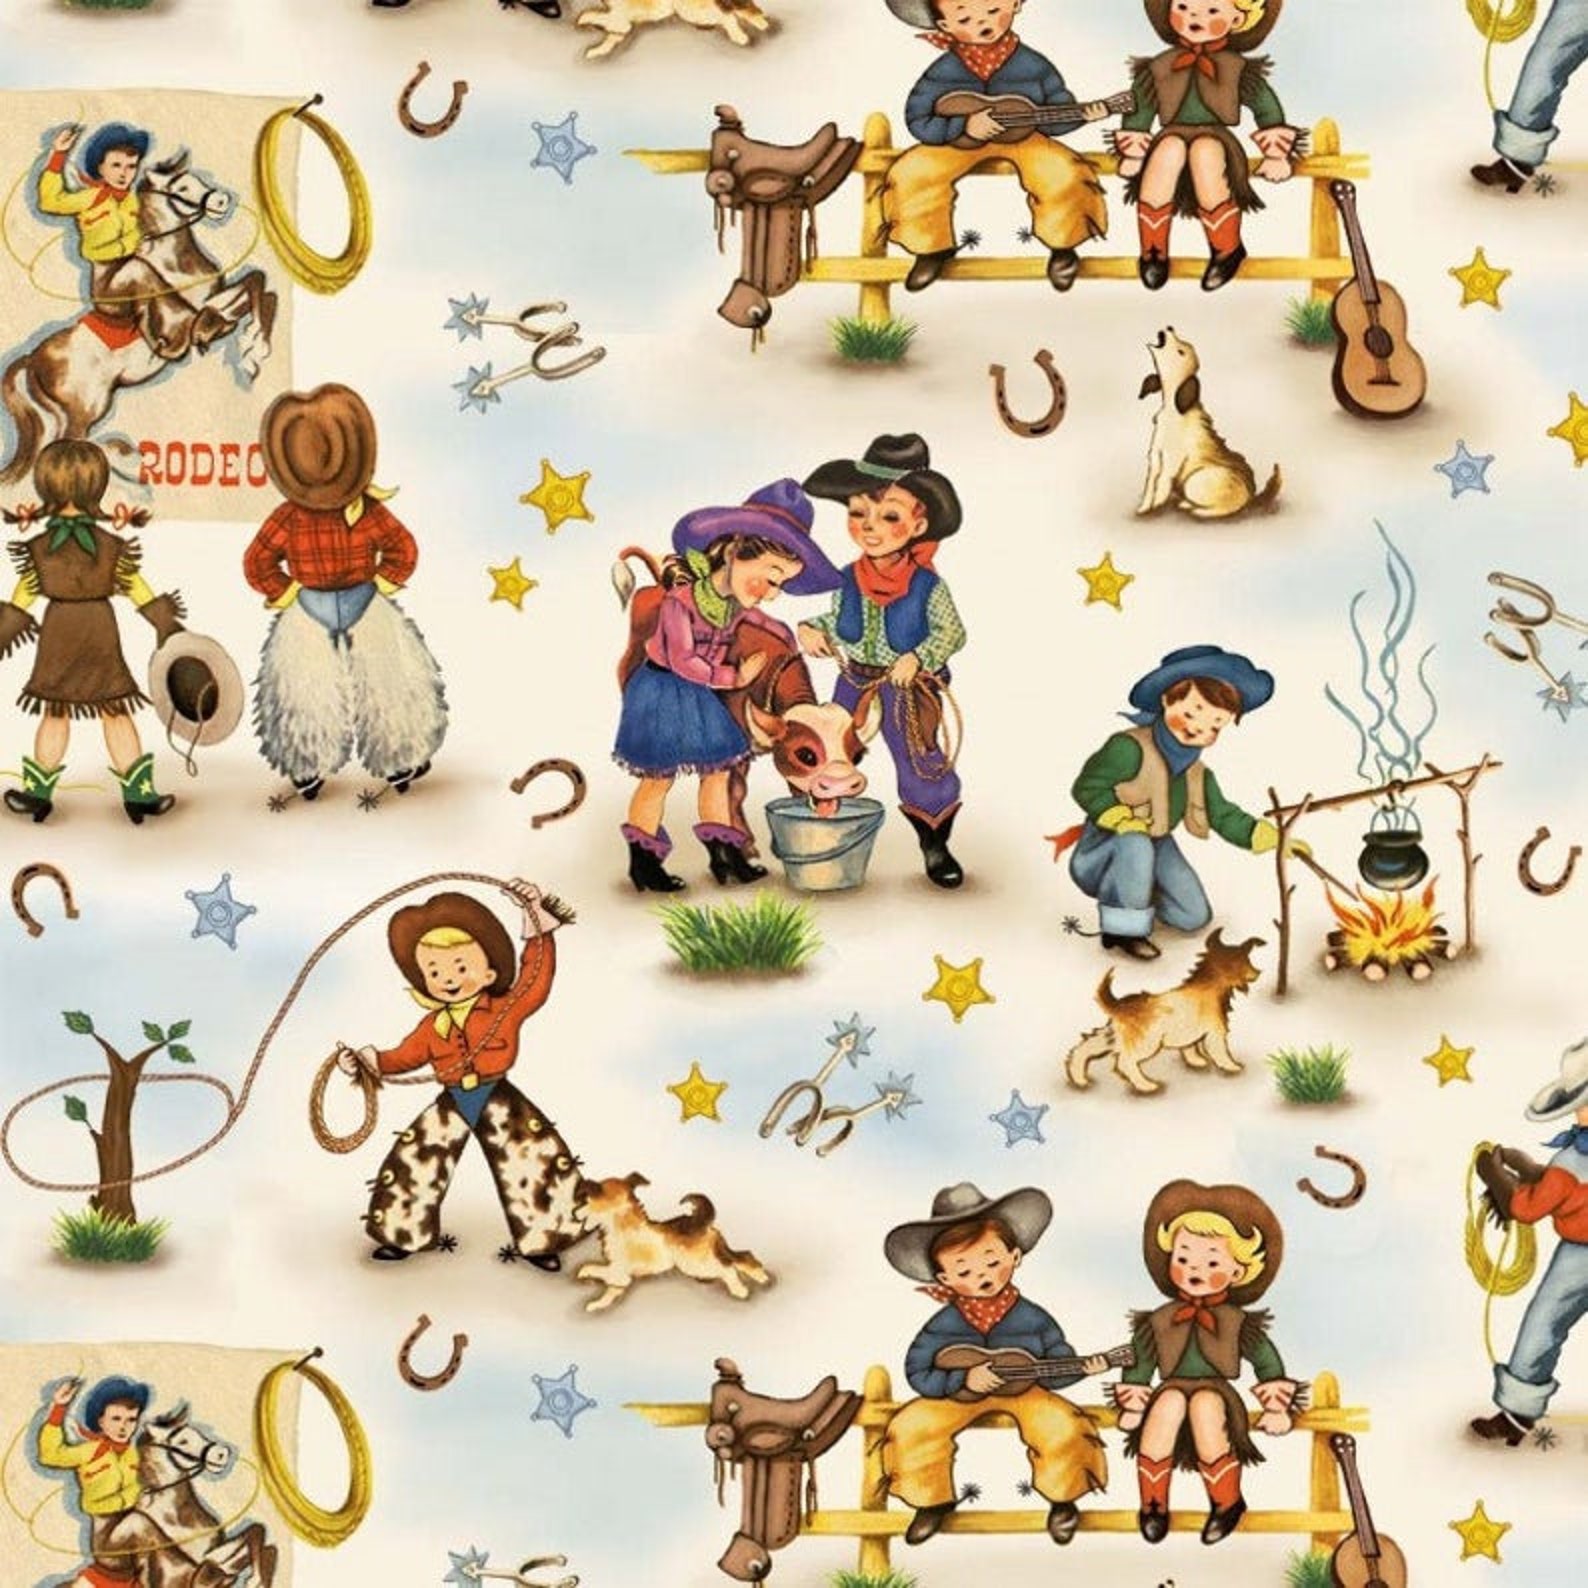 Cowboy Fabric by the yard vintage print cotton quilting | Etsy